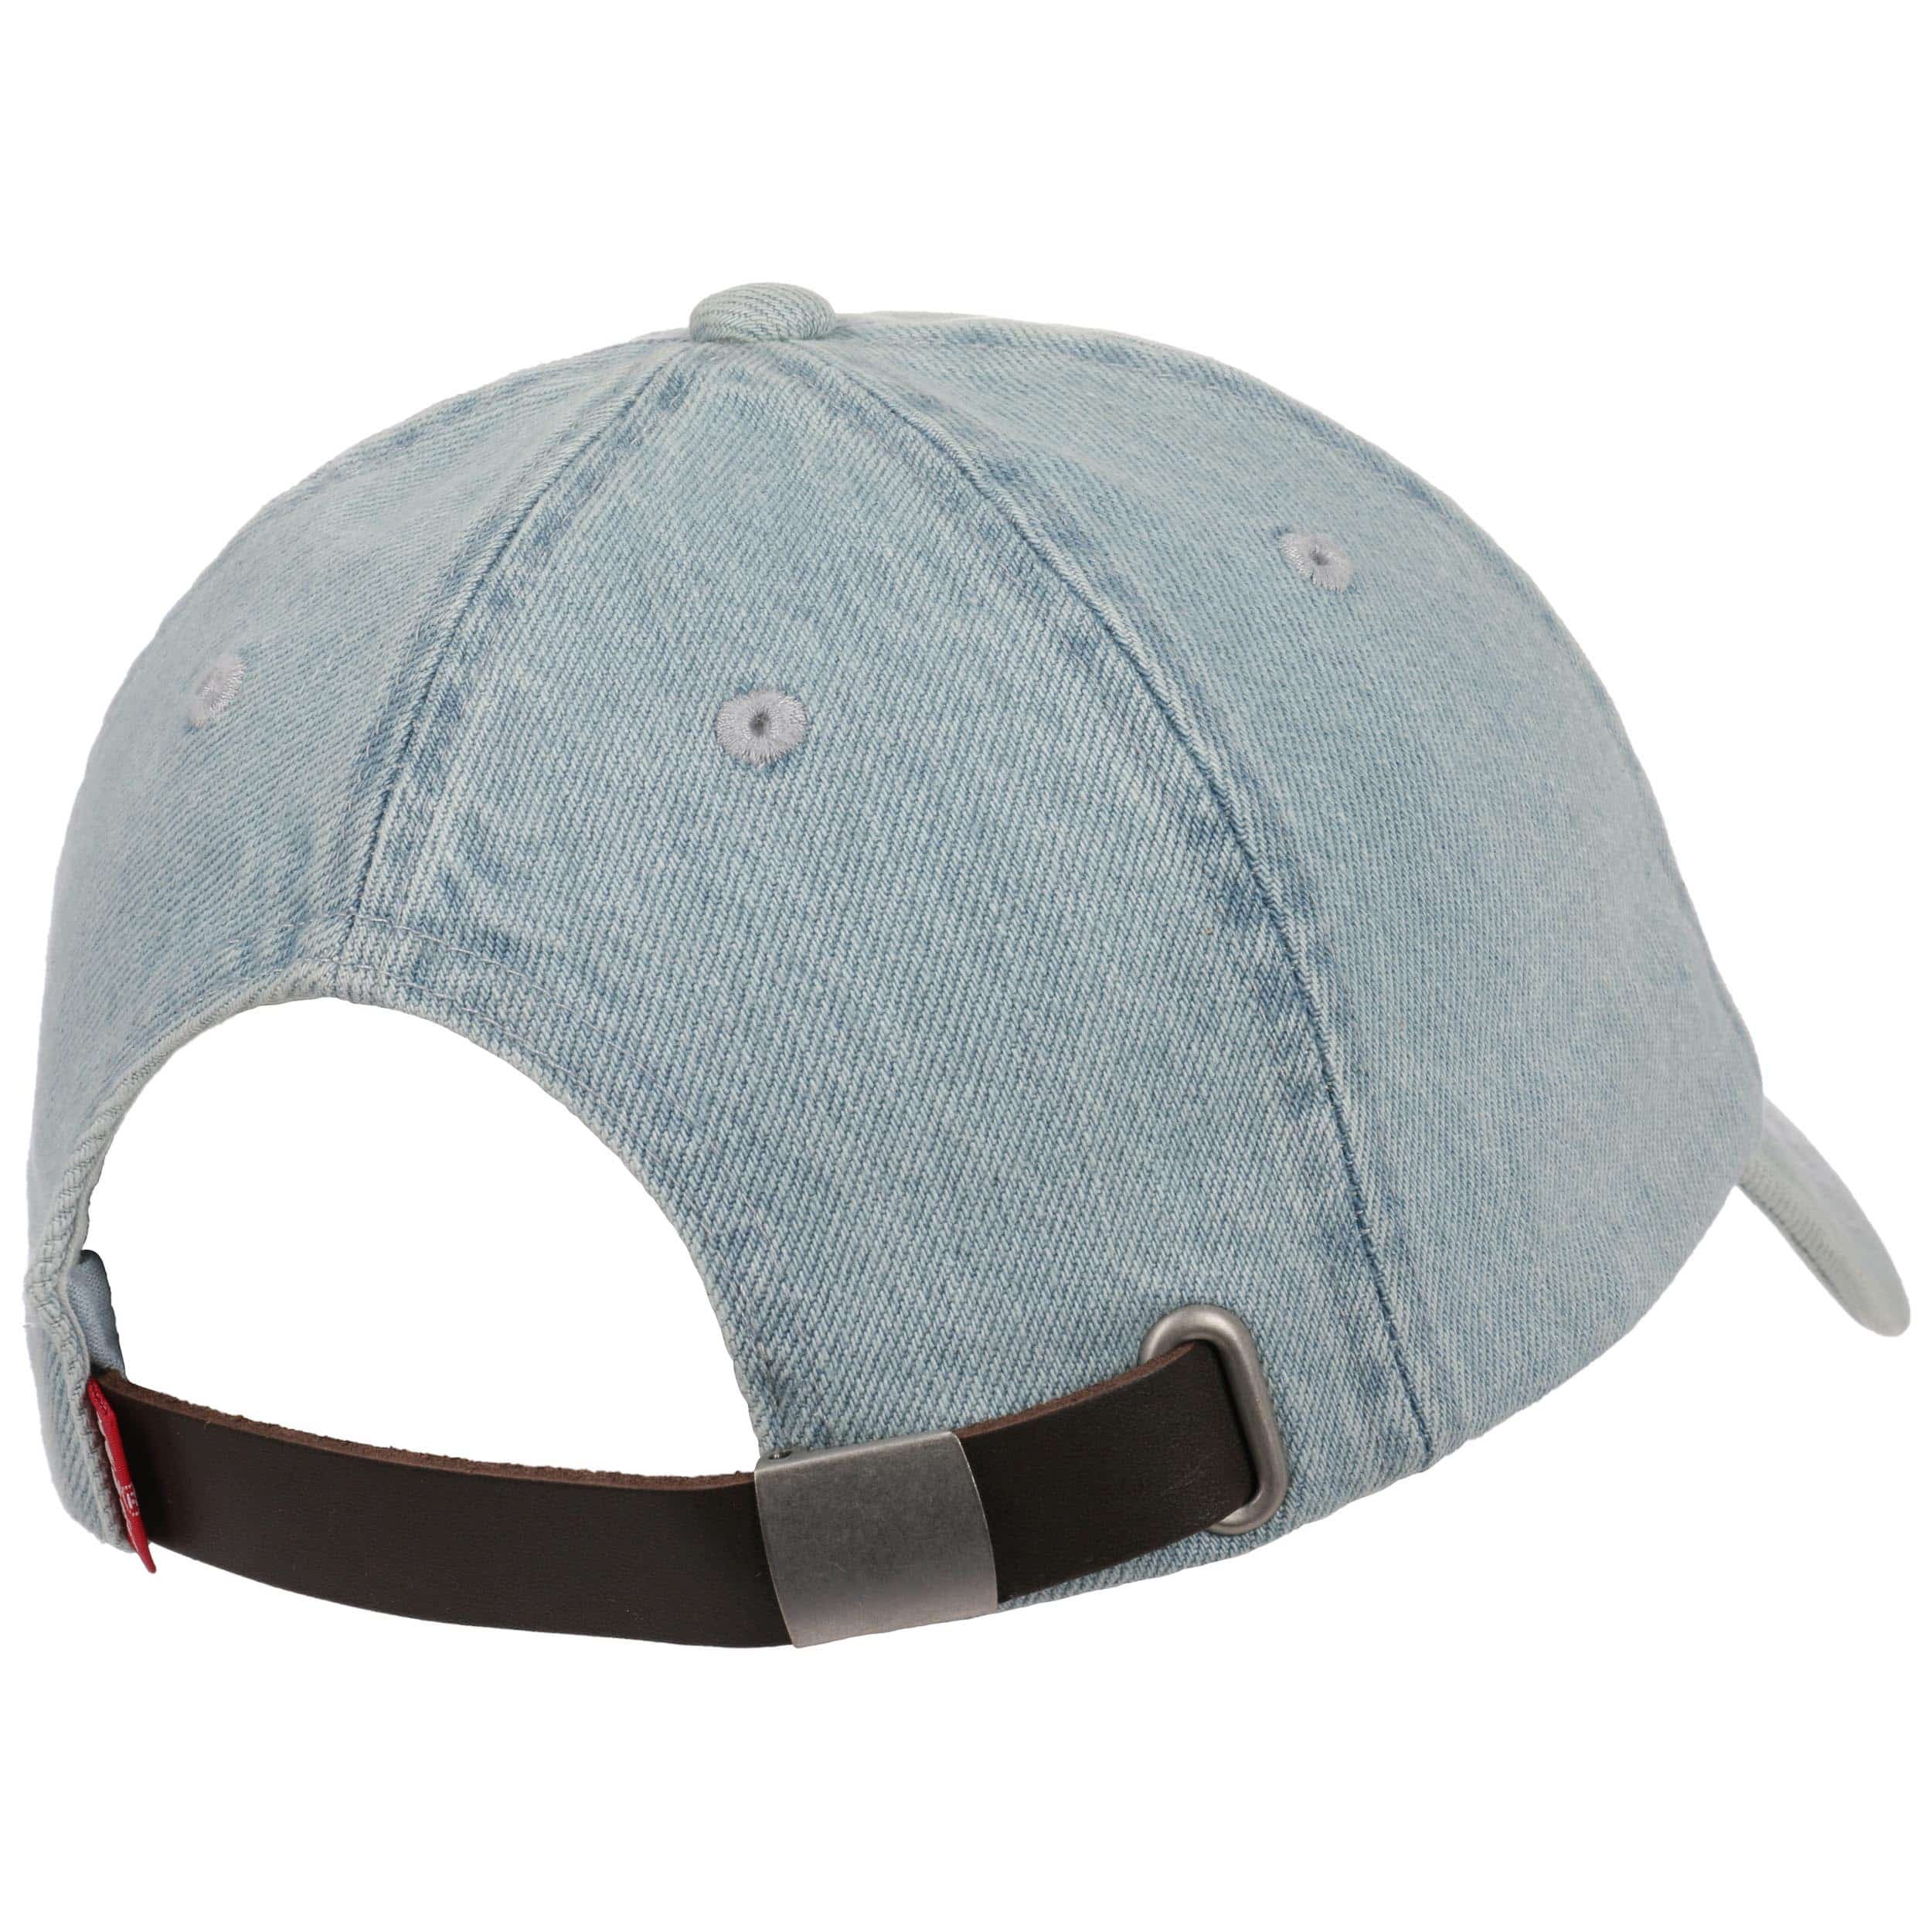 Snoopy Strapback Cap by Levi´s, GBP 32,95 --> Hats, caps & beanies shop ...